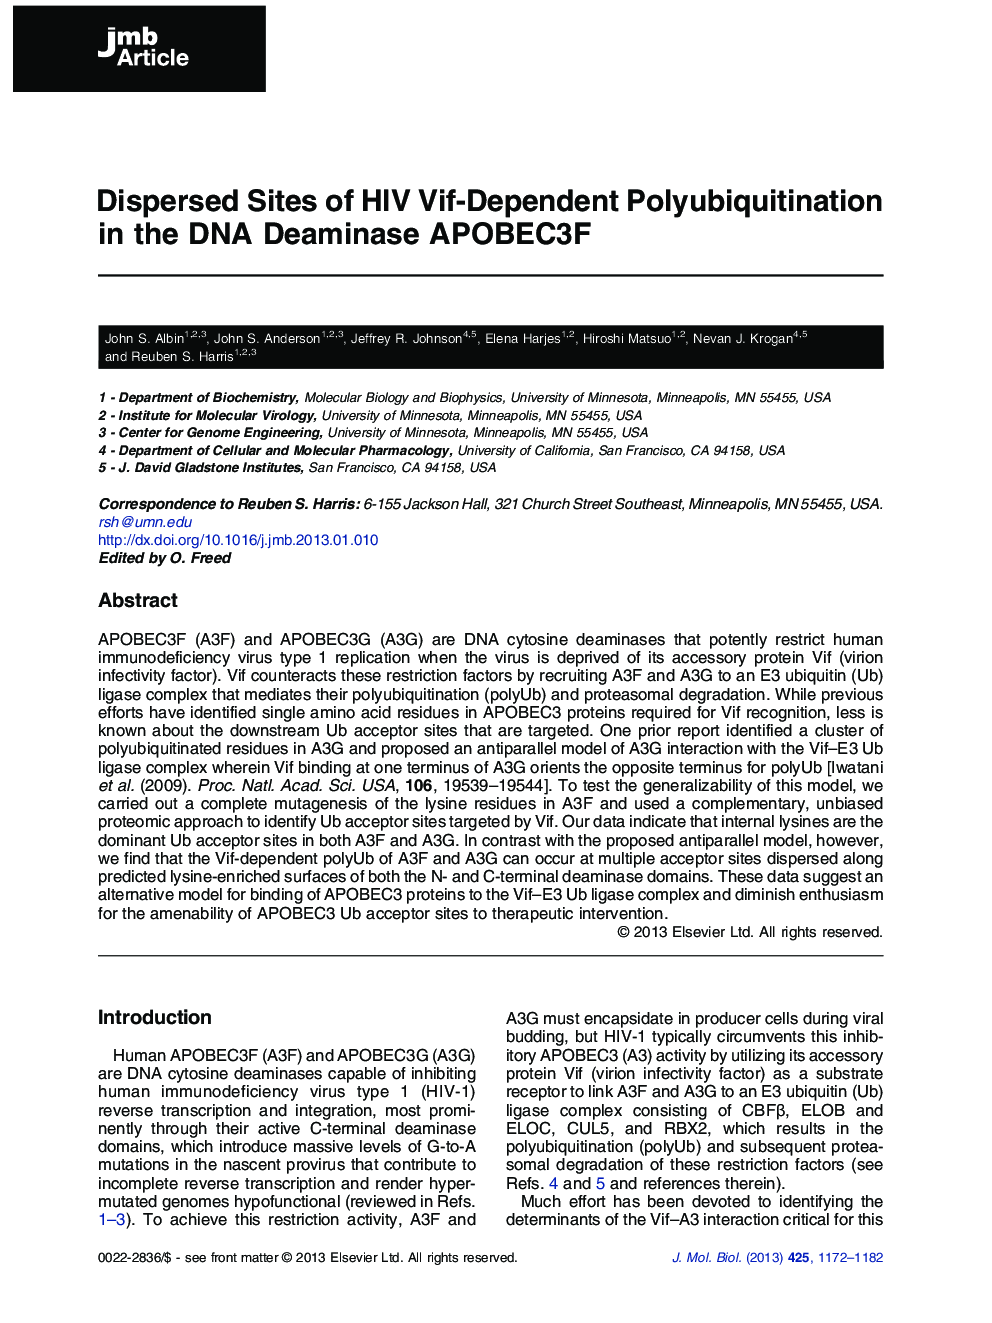 Dispersed Sites of HIV Vif-Dependent Polyubiquitination in the DNA Deaminase APOBEC3F